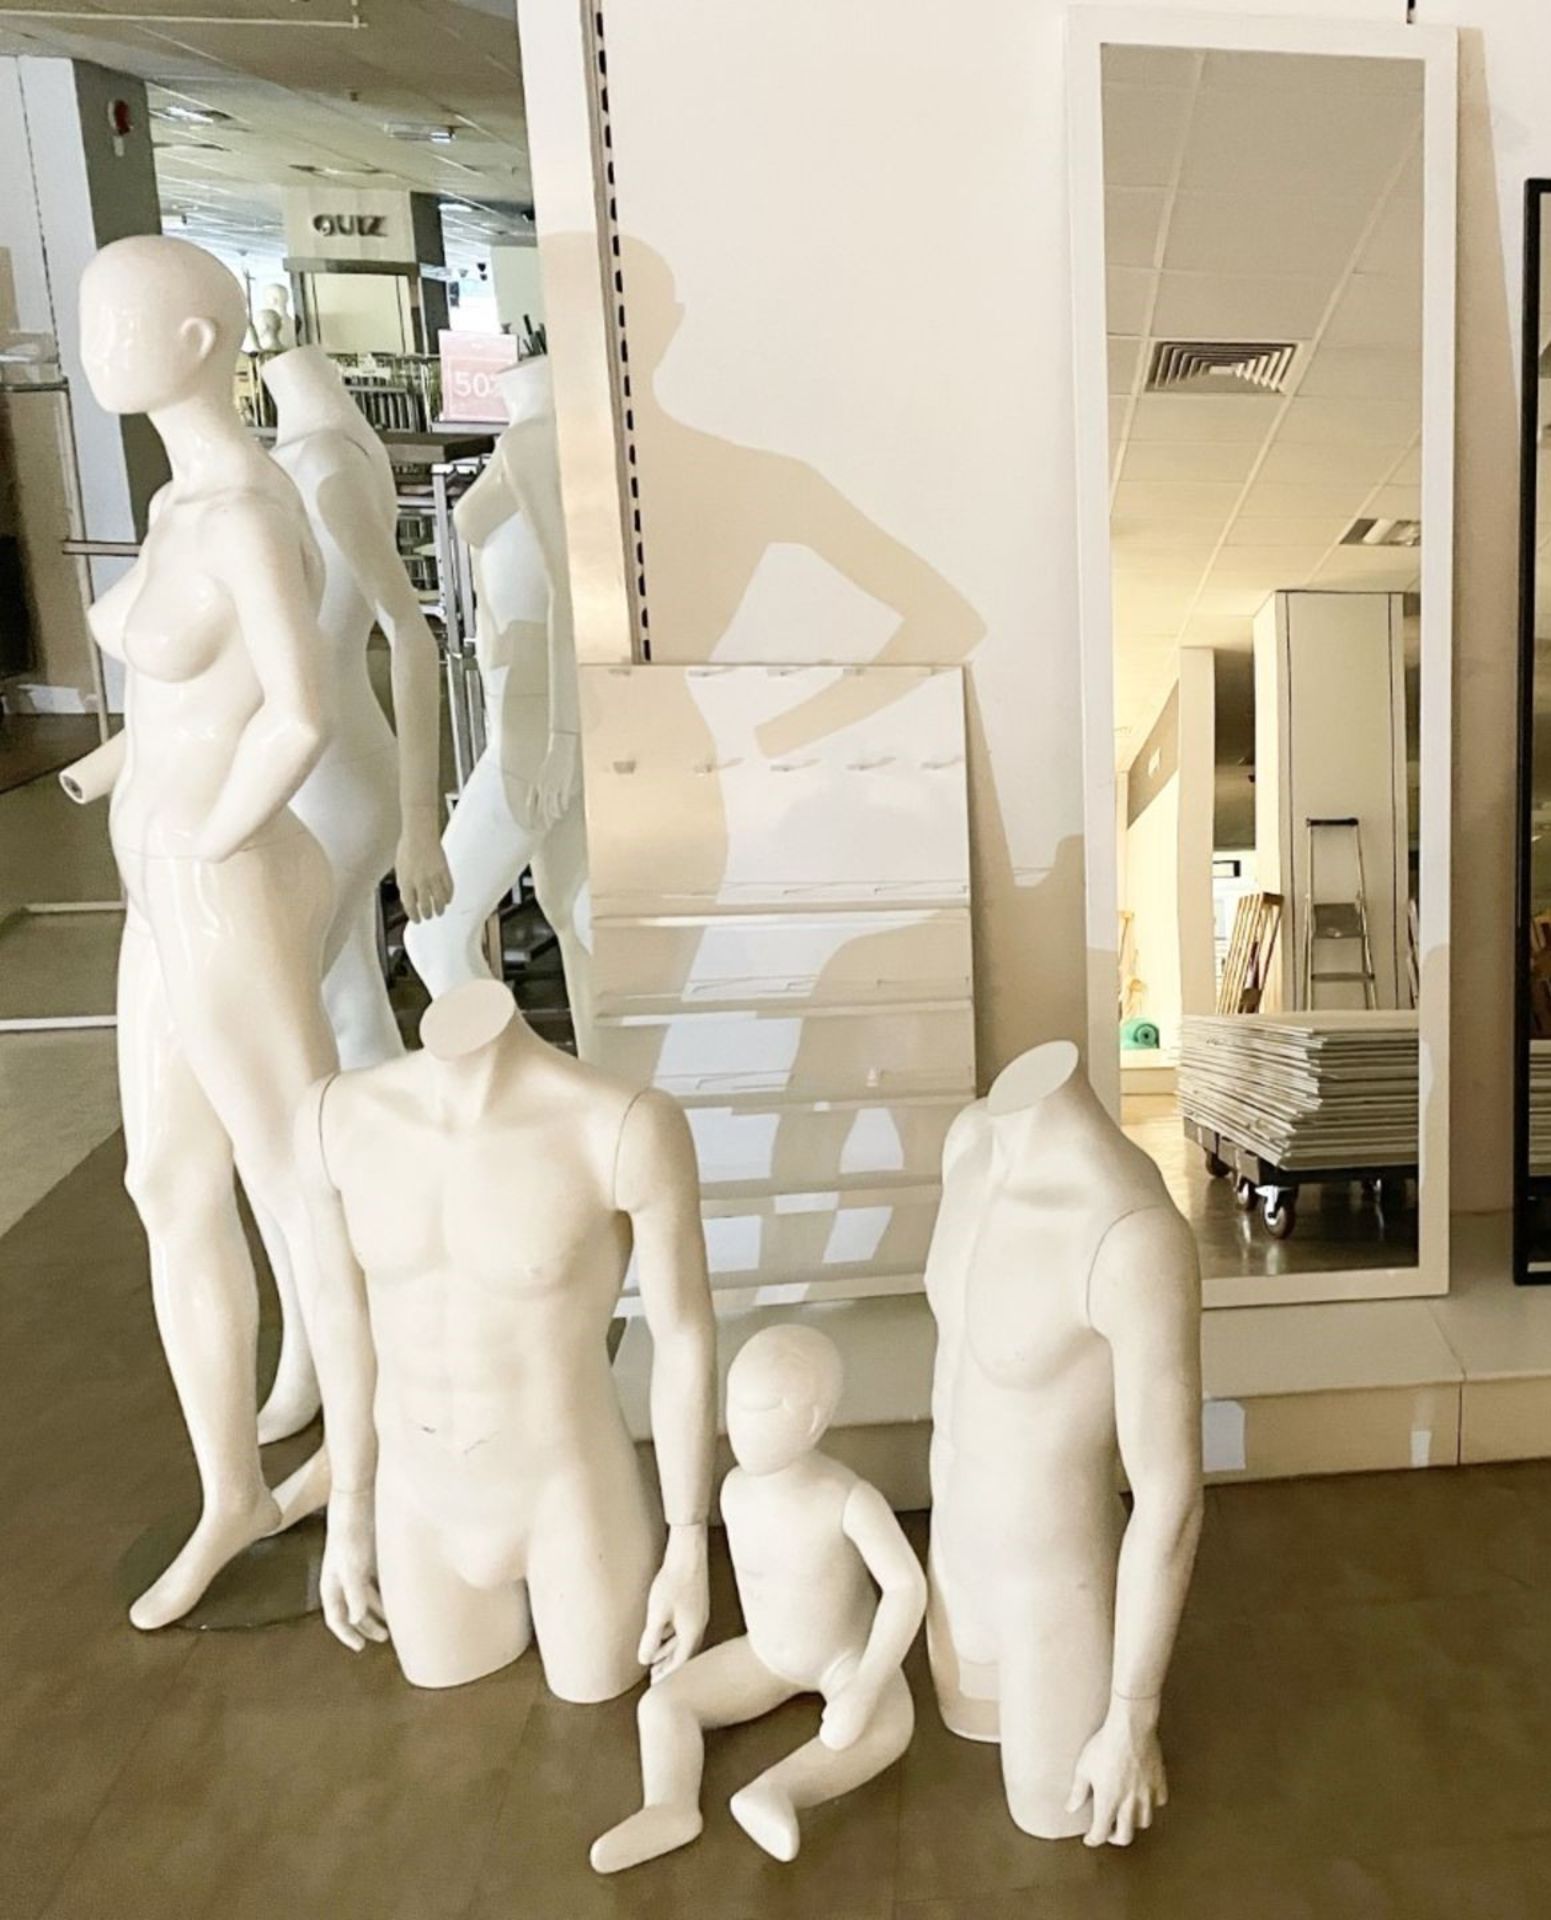 6 x Assorted Mannequins Plus Four 1 x Wall Mirror and 1 x Wall Display - Includes Complete and